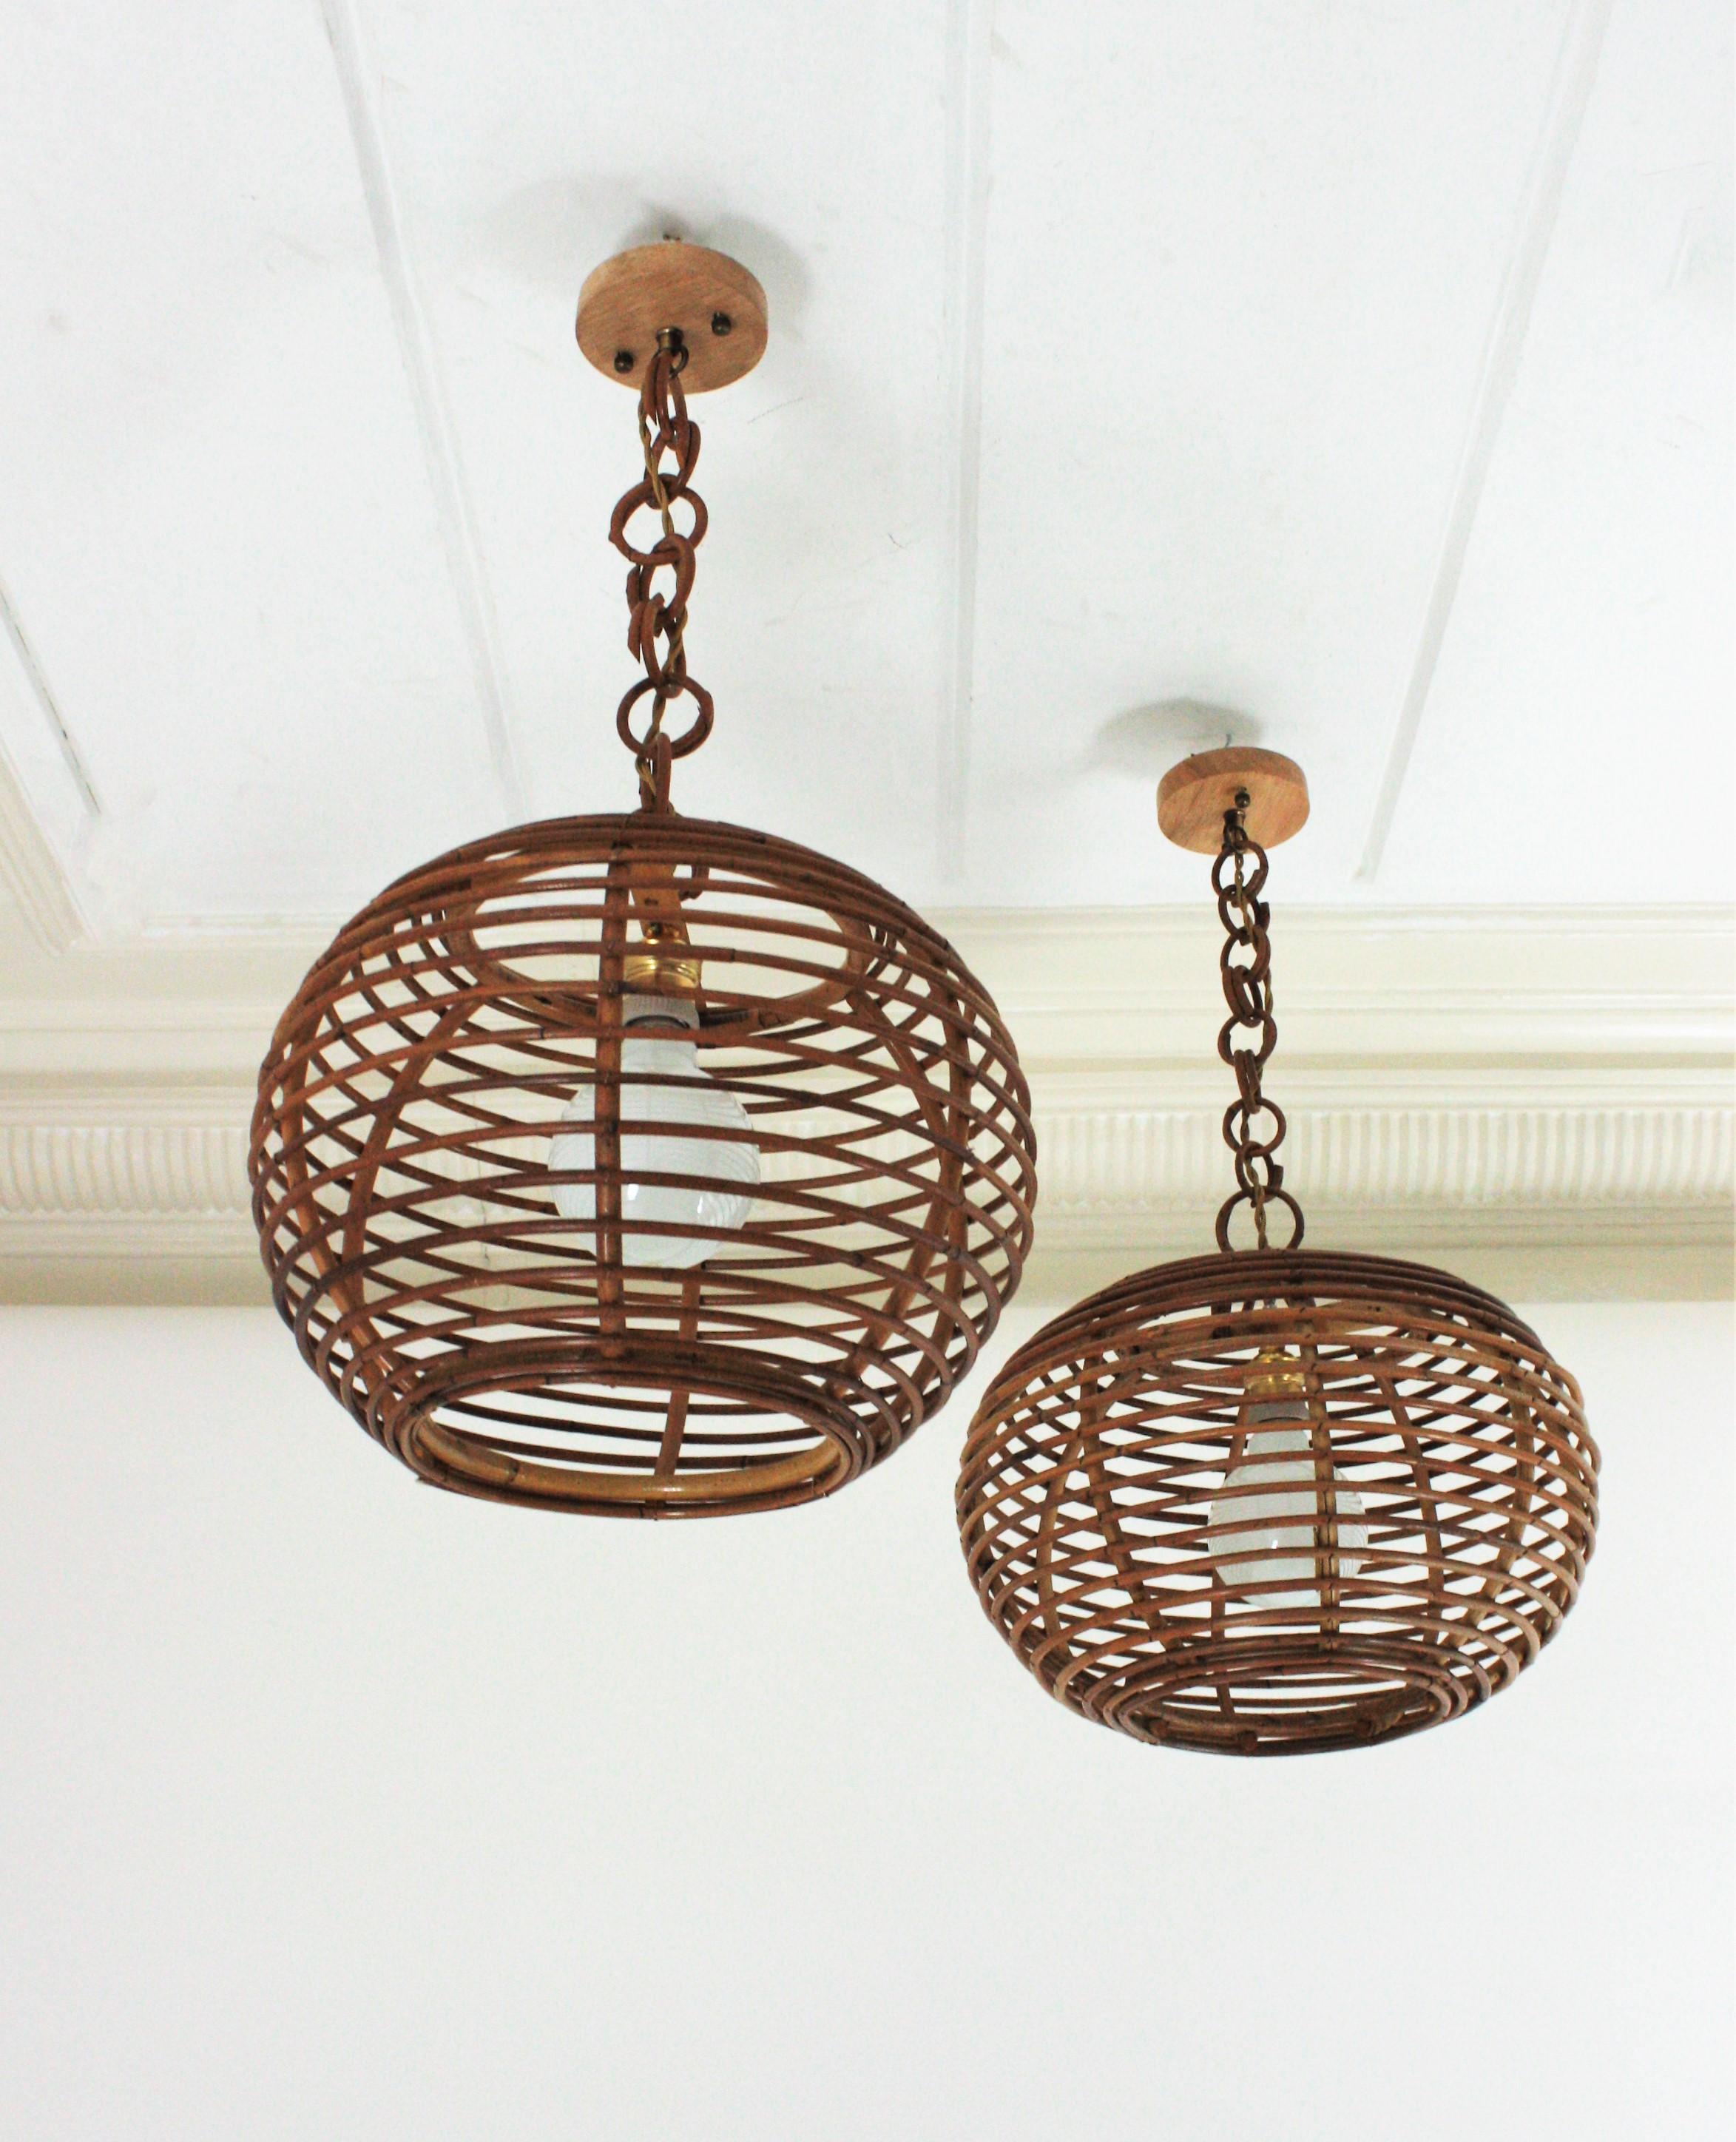 Eye-catching pair of rattan lanterns with globe or ball shaped lampshades, Spain, 1950-1960s.
These suspension lamps are entirely handcrafted with rattan and bamboo. The ball shaped shades hang from chains with round rattan links that can be